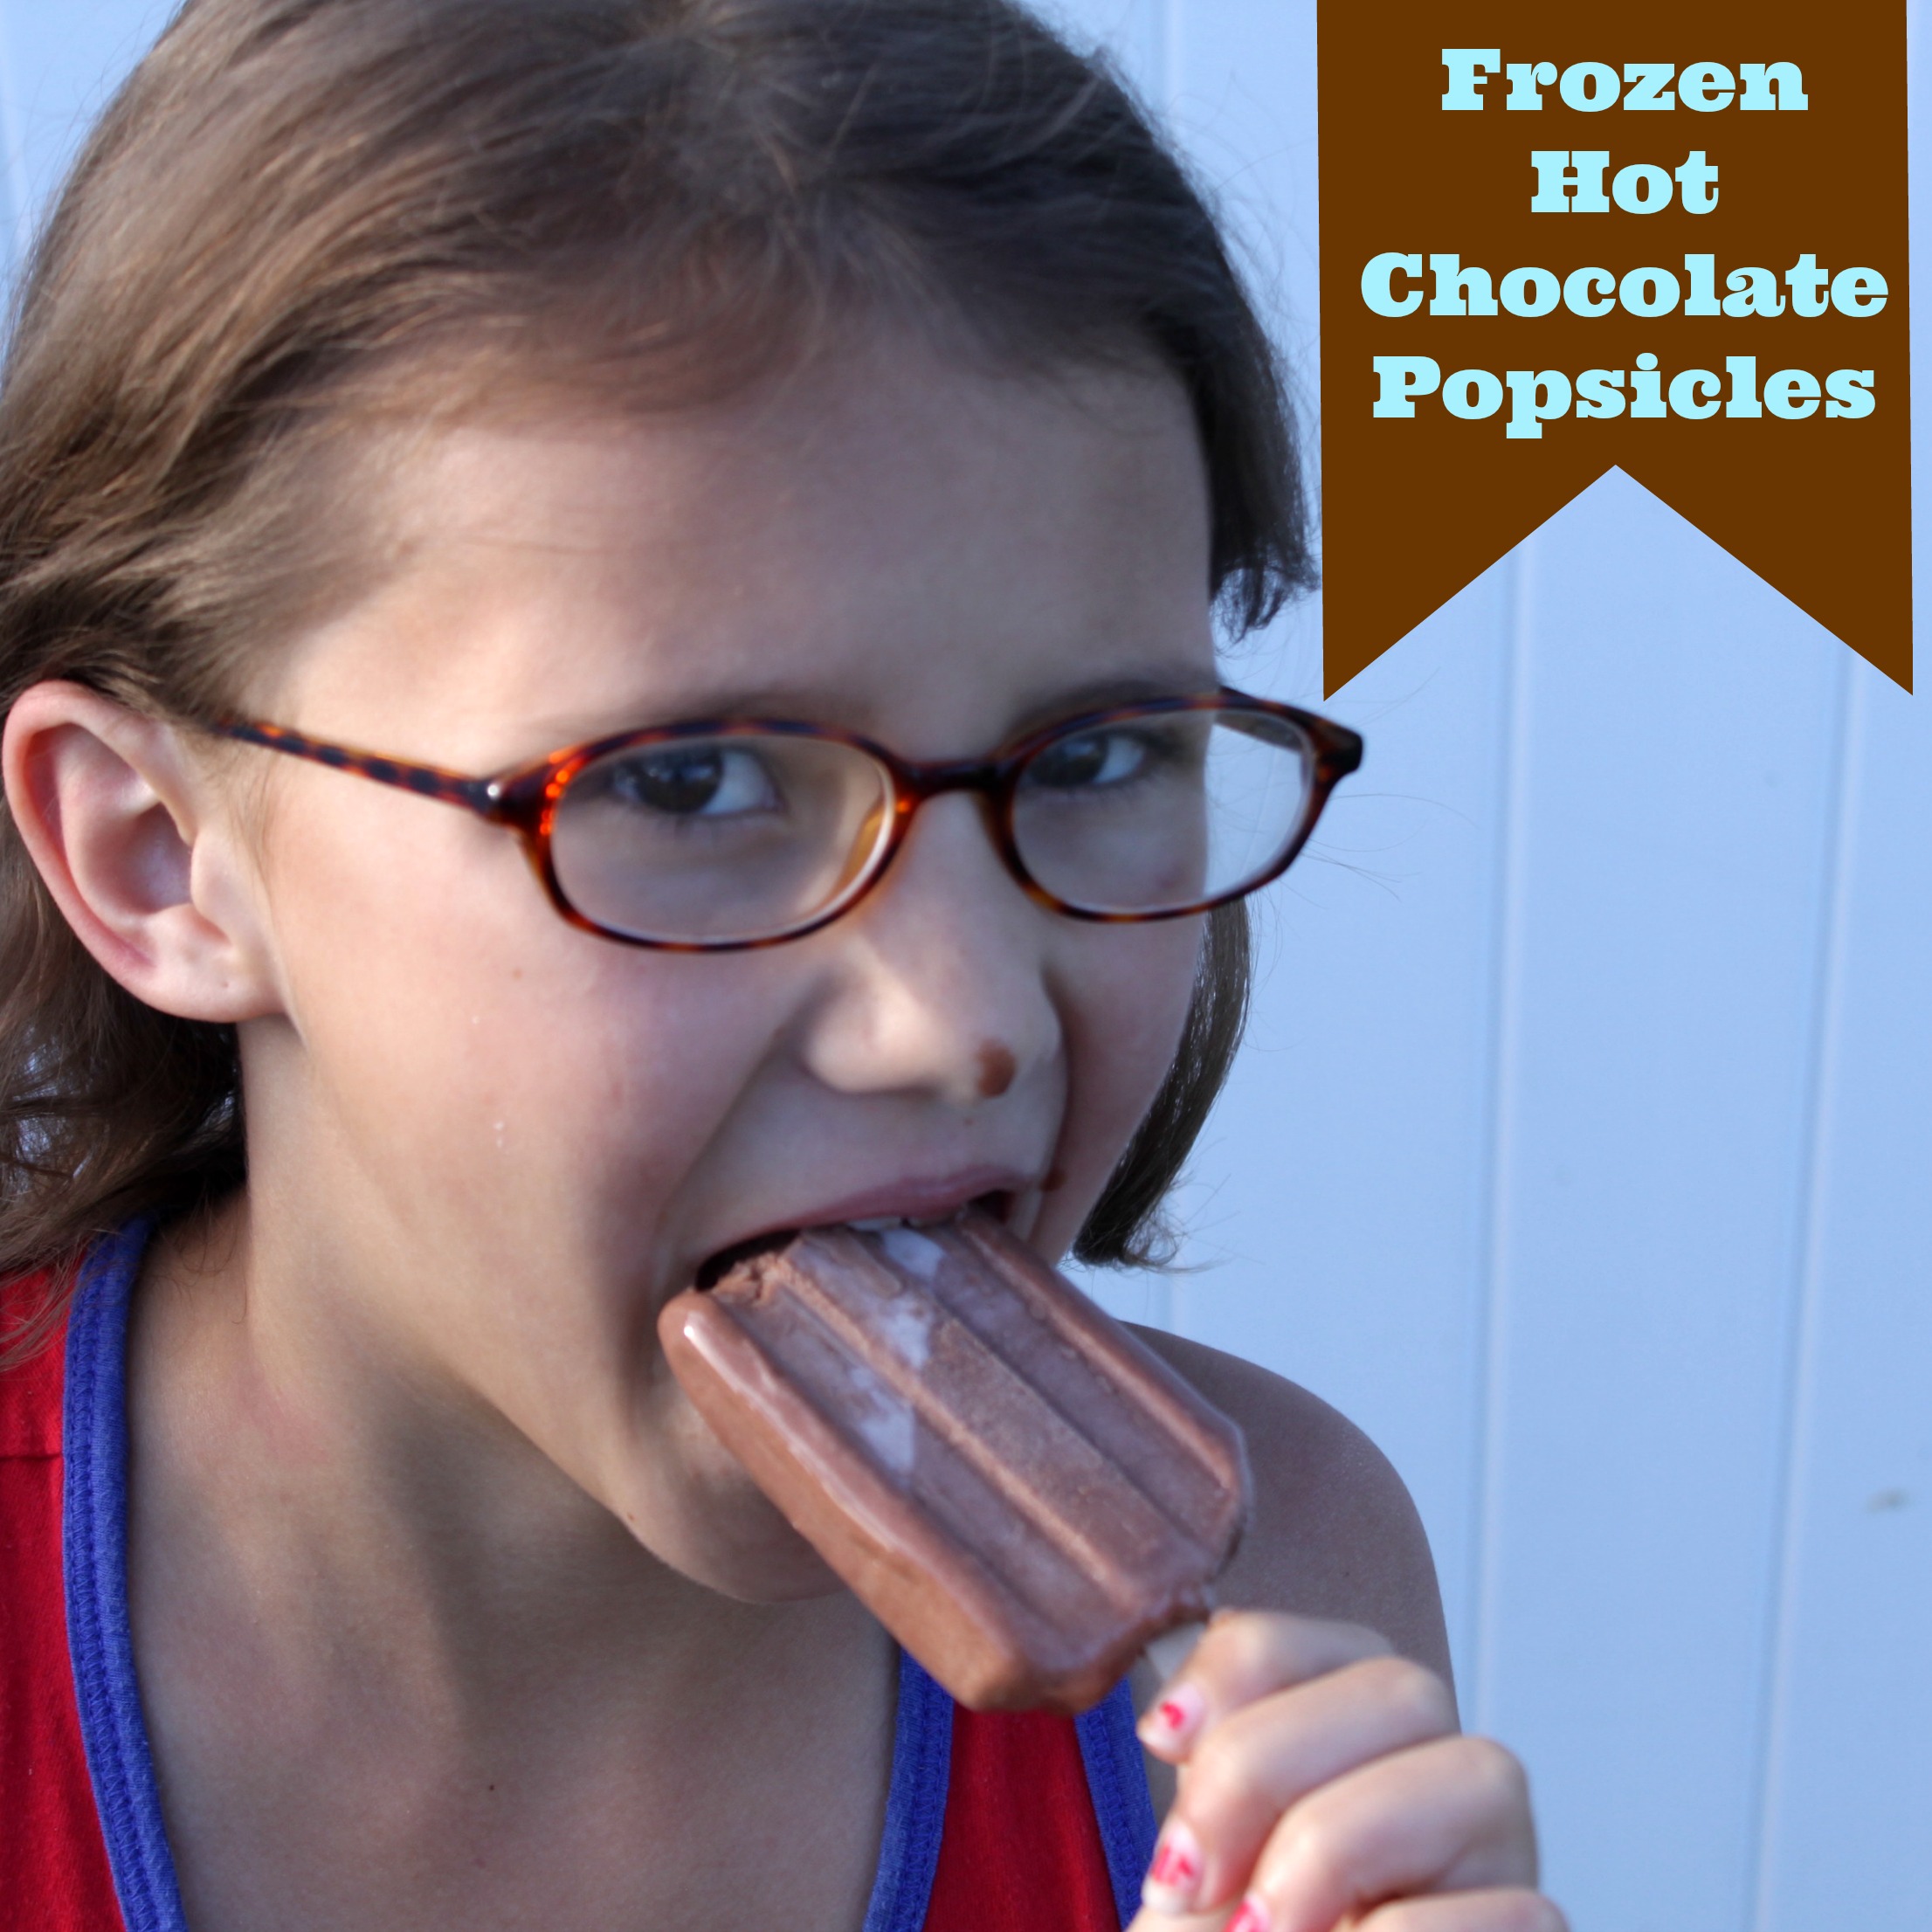 Frozen Hot Chocolate Popsicles